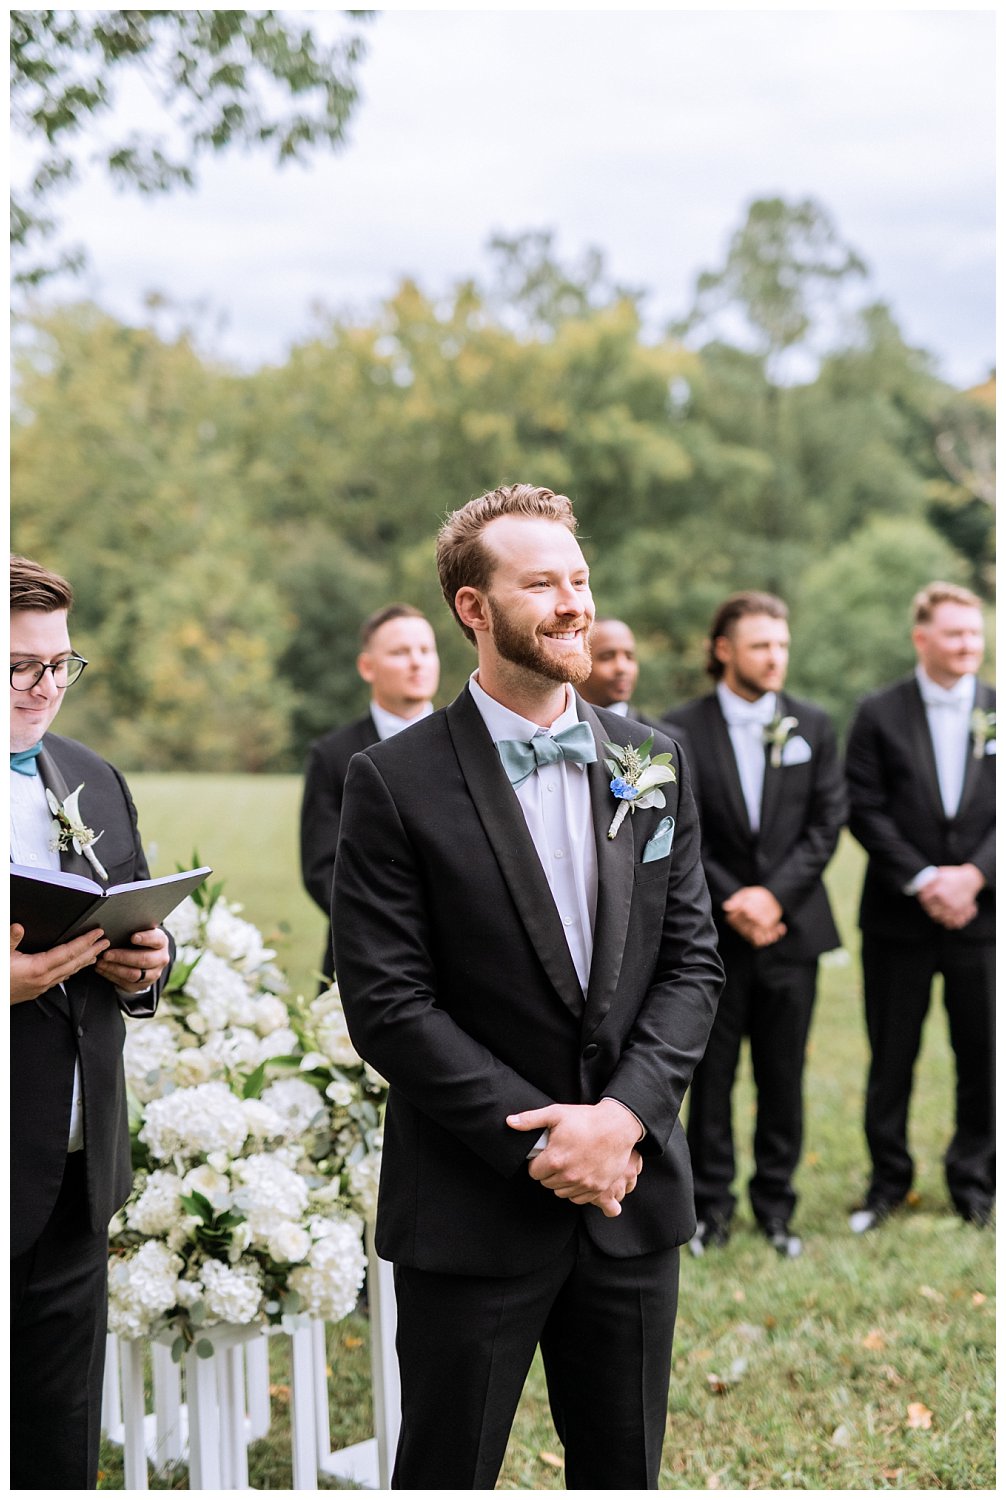 Groom at ceremony at Westover & Maymont Gardens wedding